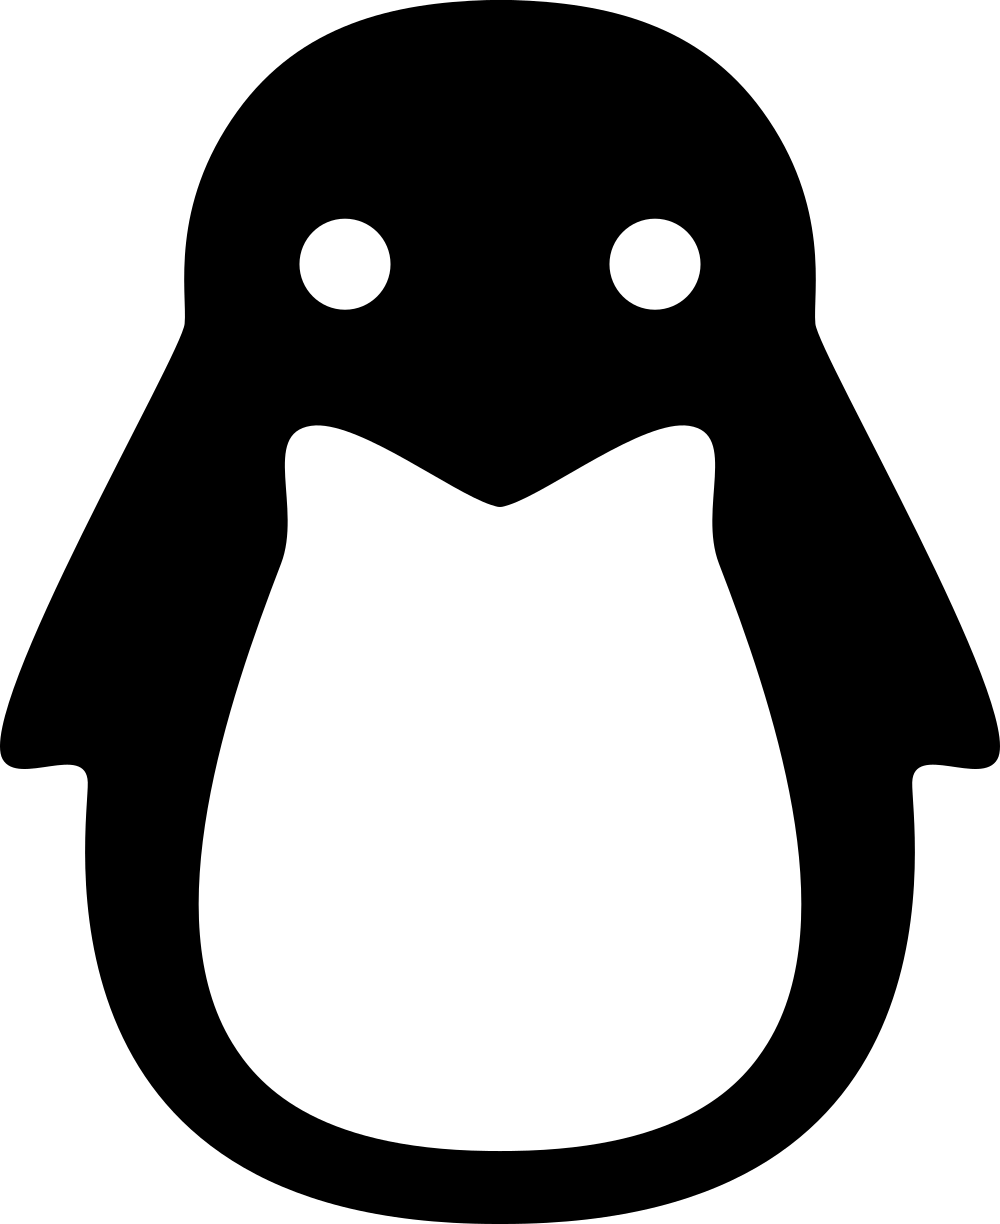 Linux Logo - The Other Linux Logo